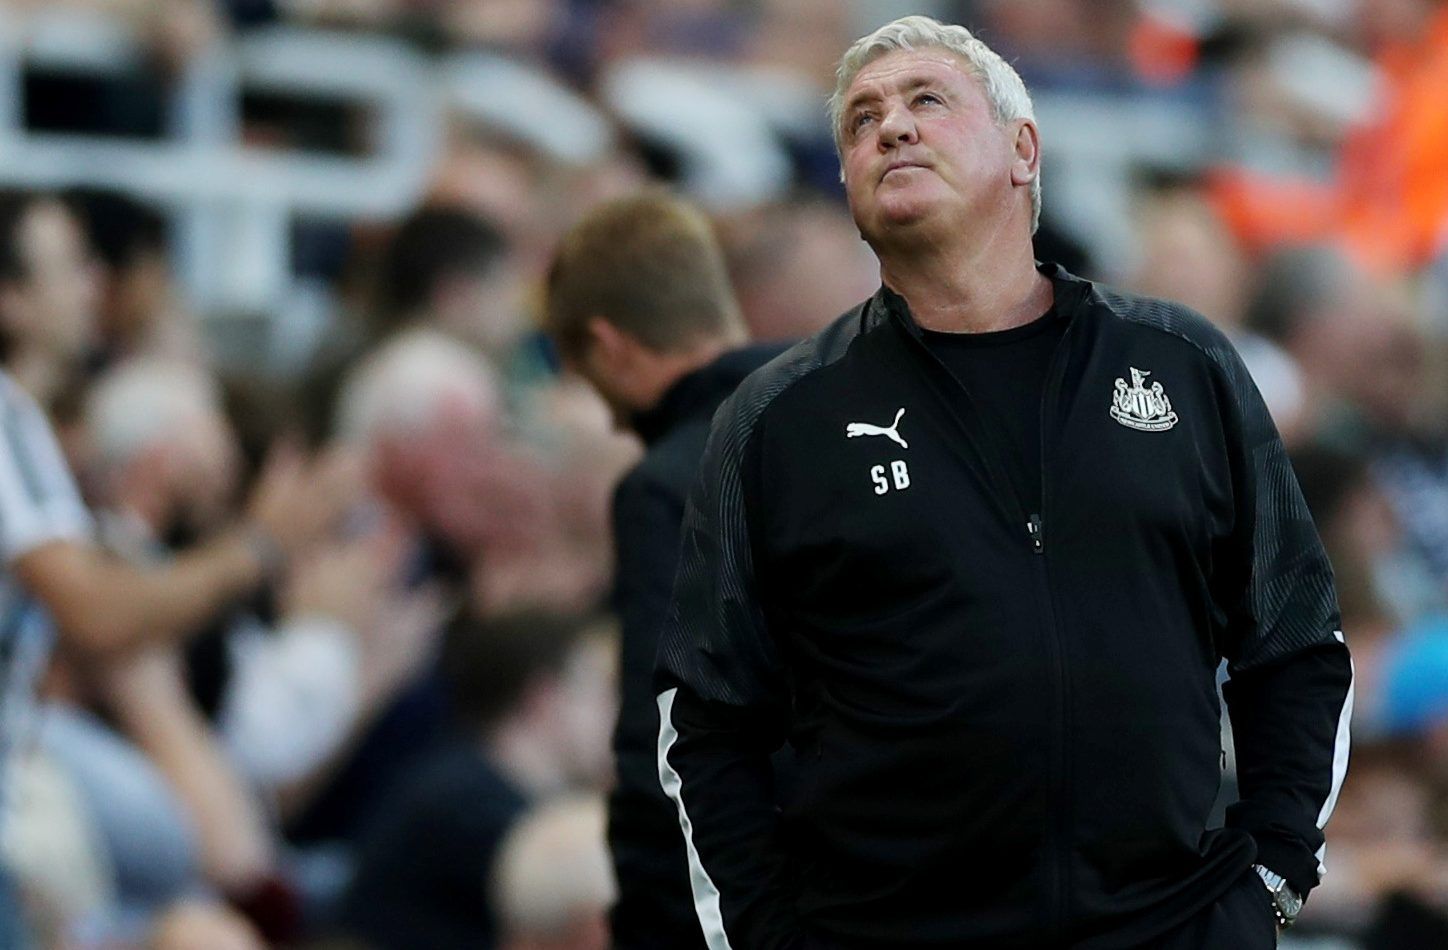 Soccer Football - Premier League - Newcastle United v Brighton &amp; Hove Albion - St James' Park, Newcastle, Britain - September 21, 2019  Newcastle United manager Steve Bruce reacts  Action Images via Reuters/Lee Smith  EDITORIAL USE ONLY. No use with unauthorized audio, video, data, fixture lists, club/league logos or 